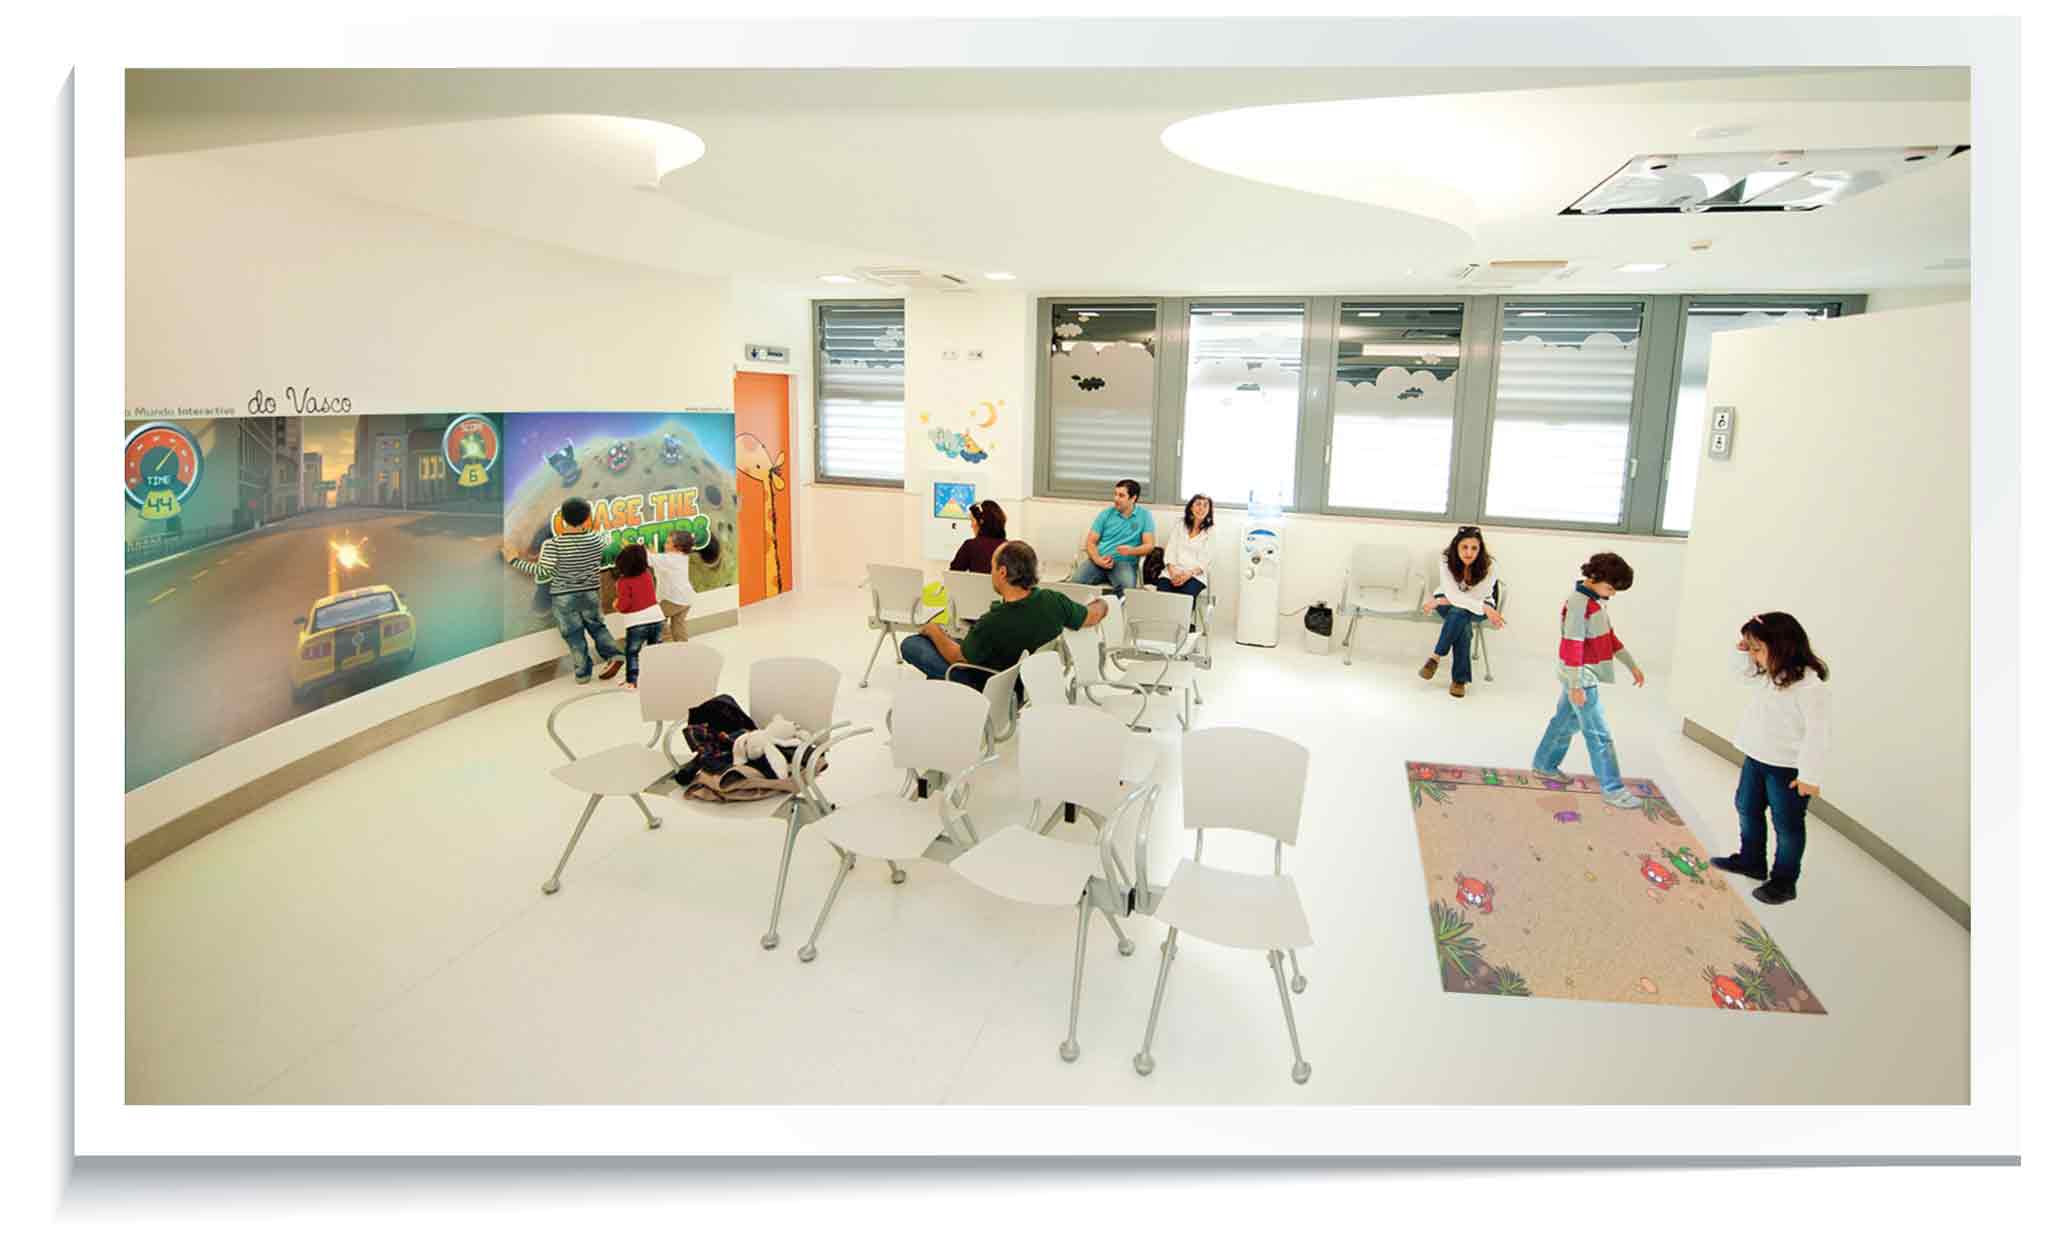 Beyond Entertainment: Interactive Floor & Wall Systems as Therapeutic Tools in Pediatric Waiting Rooms